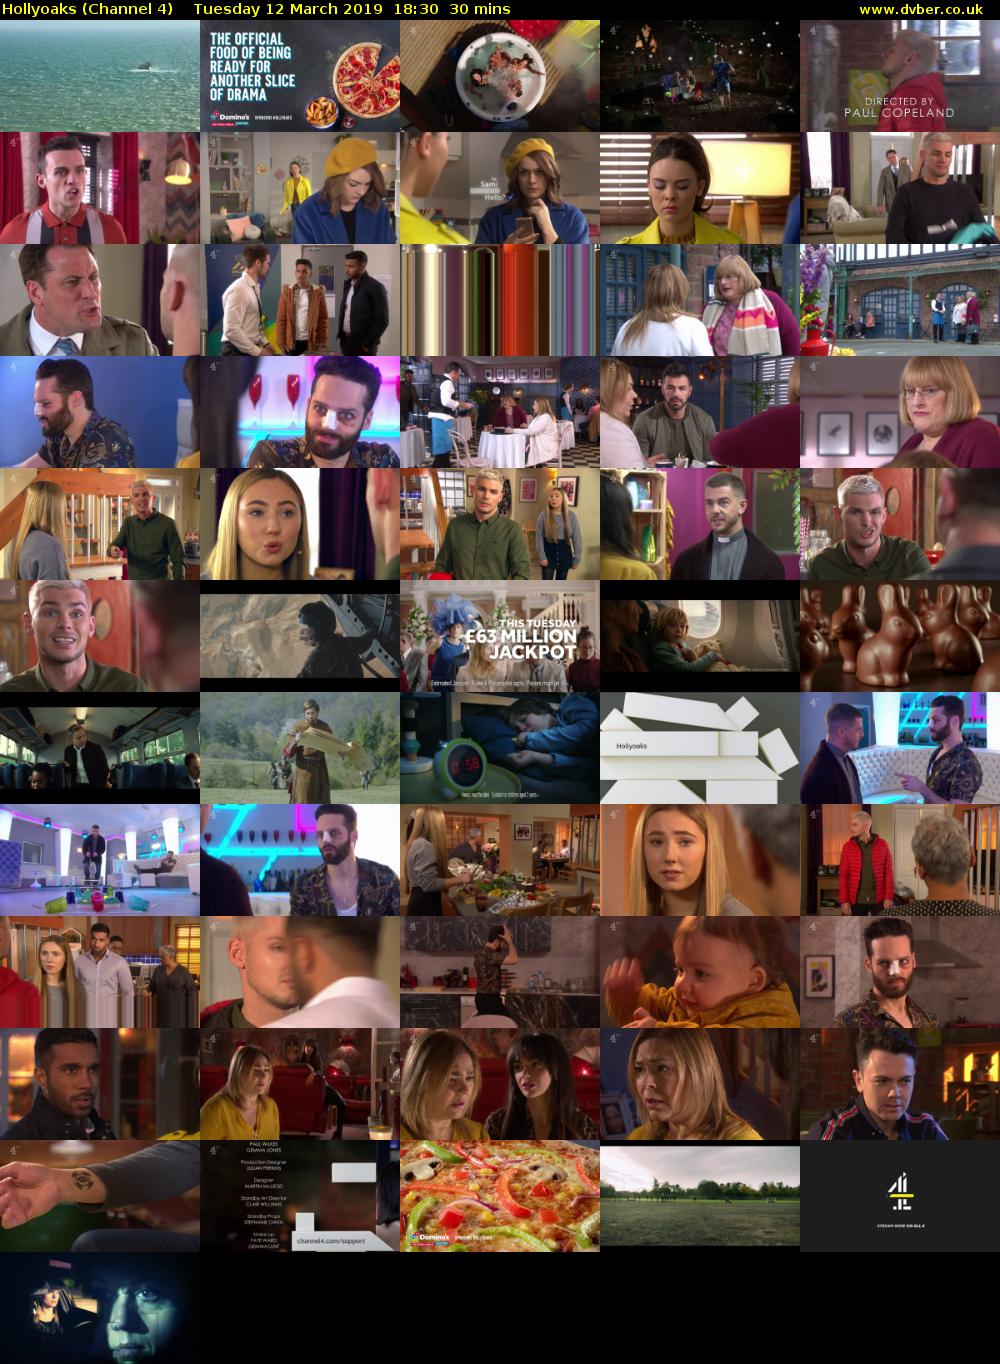 Hollyoaks (Channel 4) Tuesday 12 March 2019 18:30 - 19:00